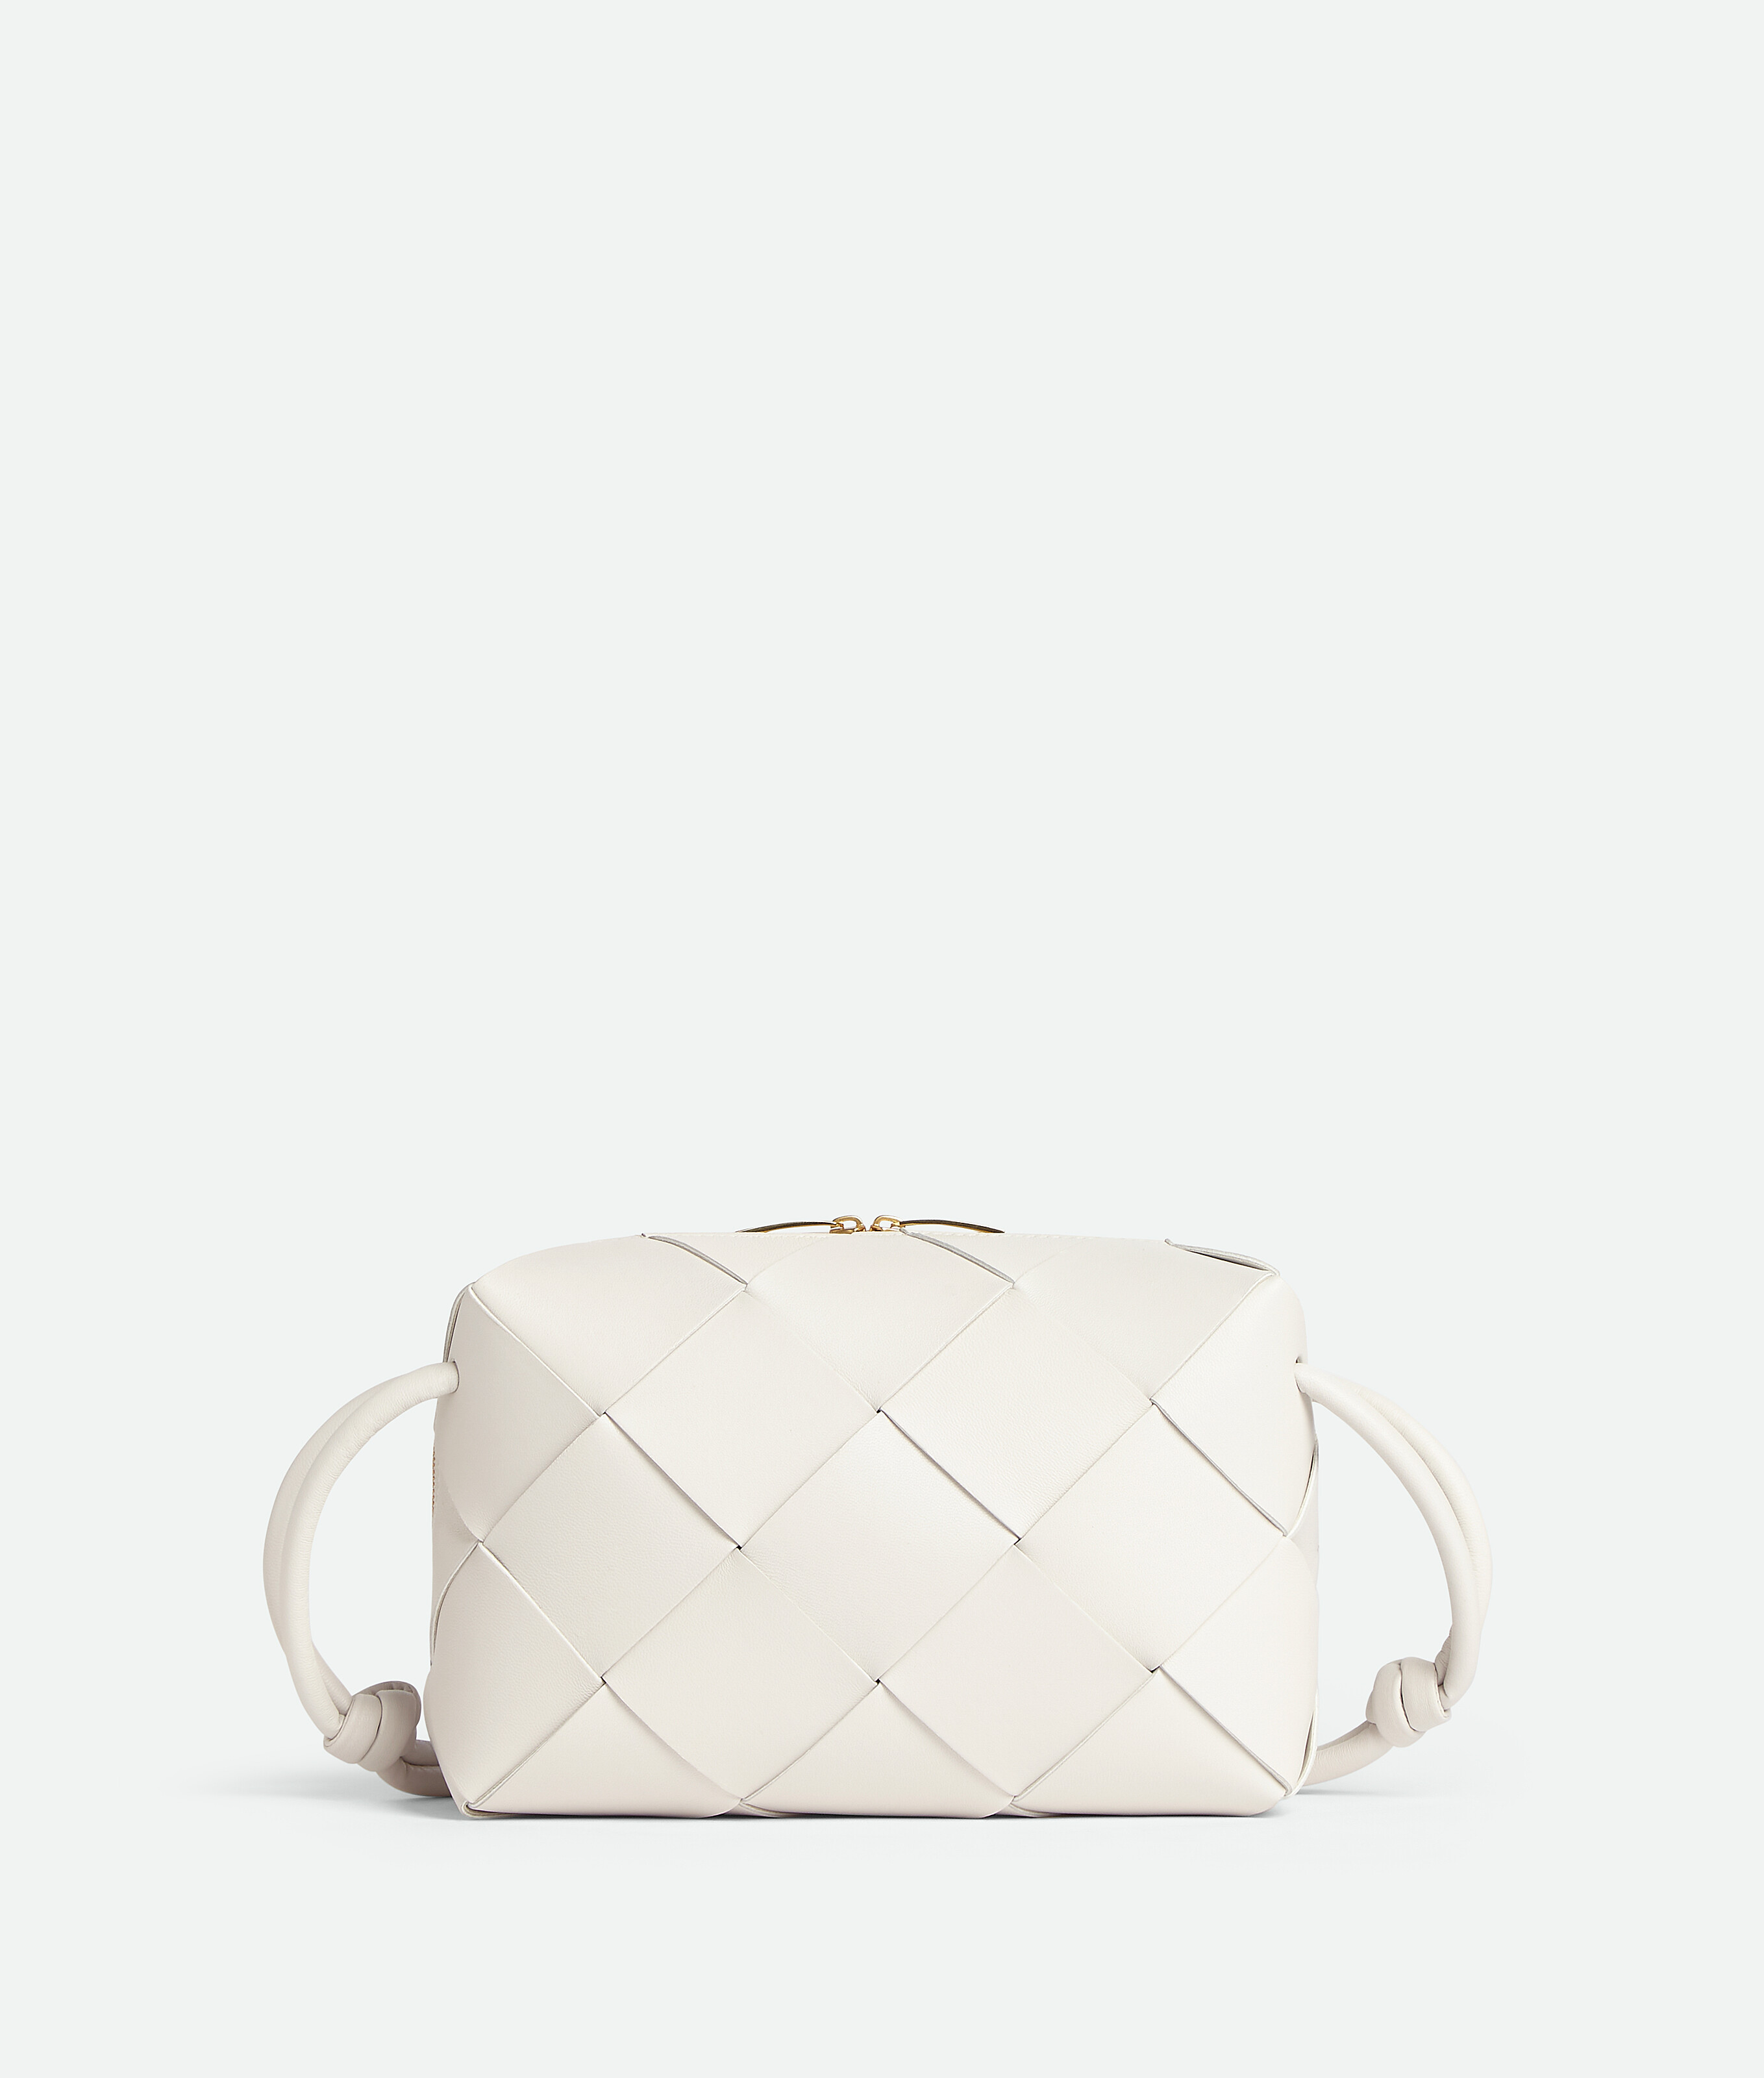 Debating whether I “need” to add a white BV mini cassette camera bag - what  are your experiences with white leather bags? : r/handbags